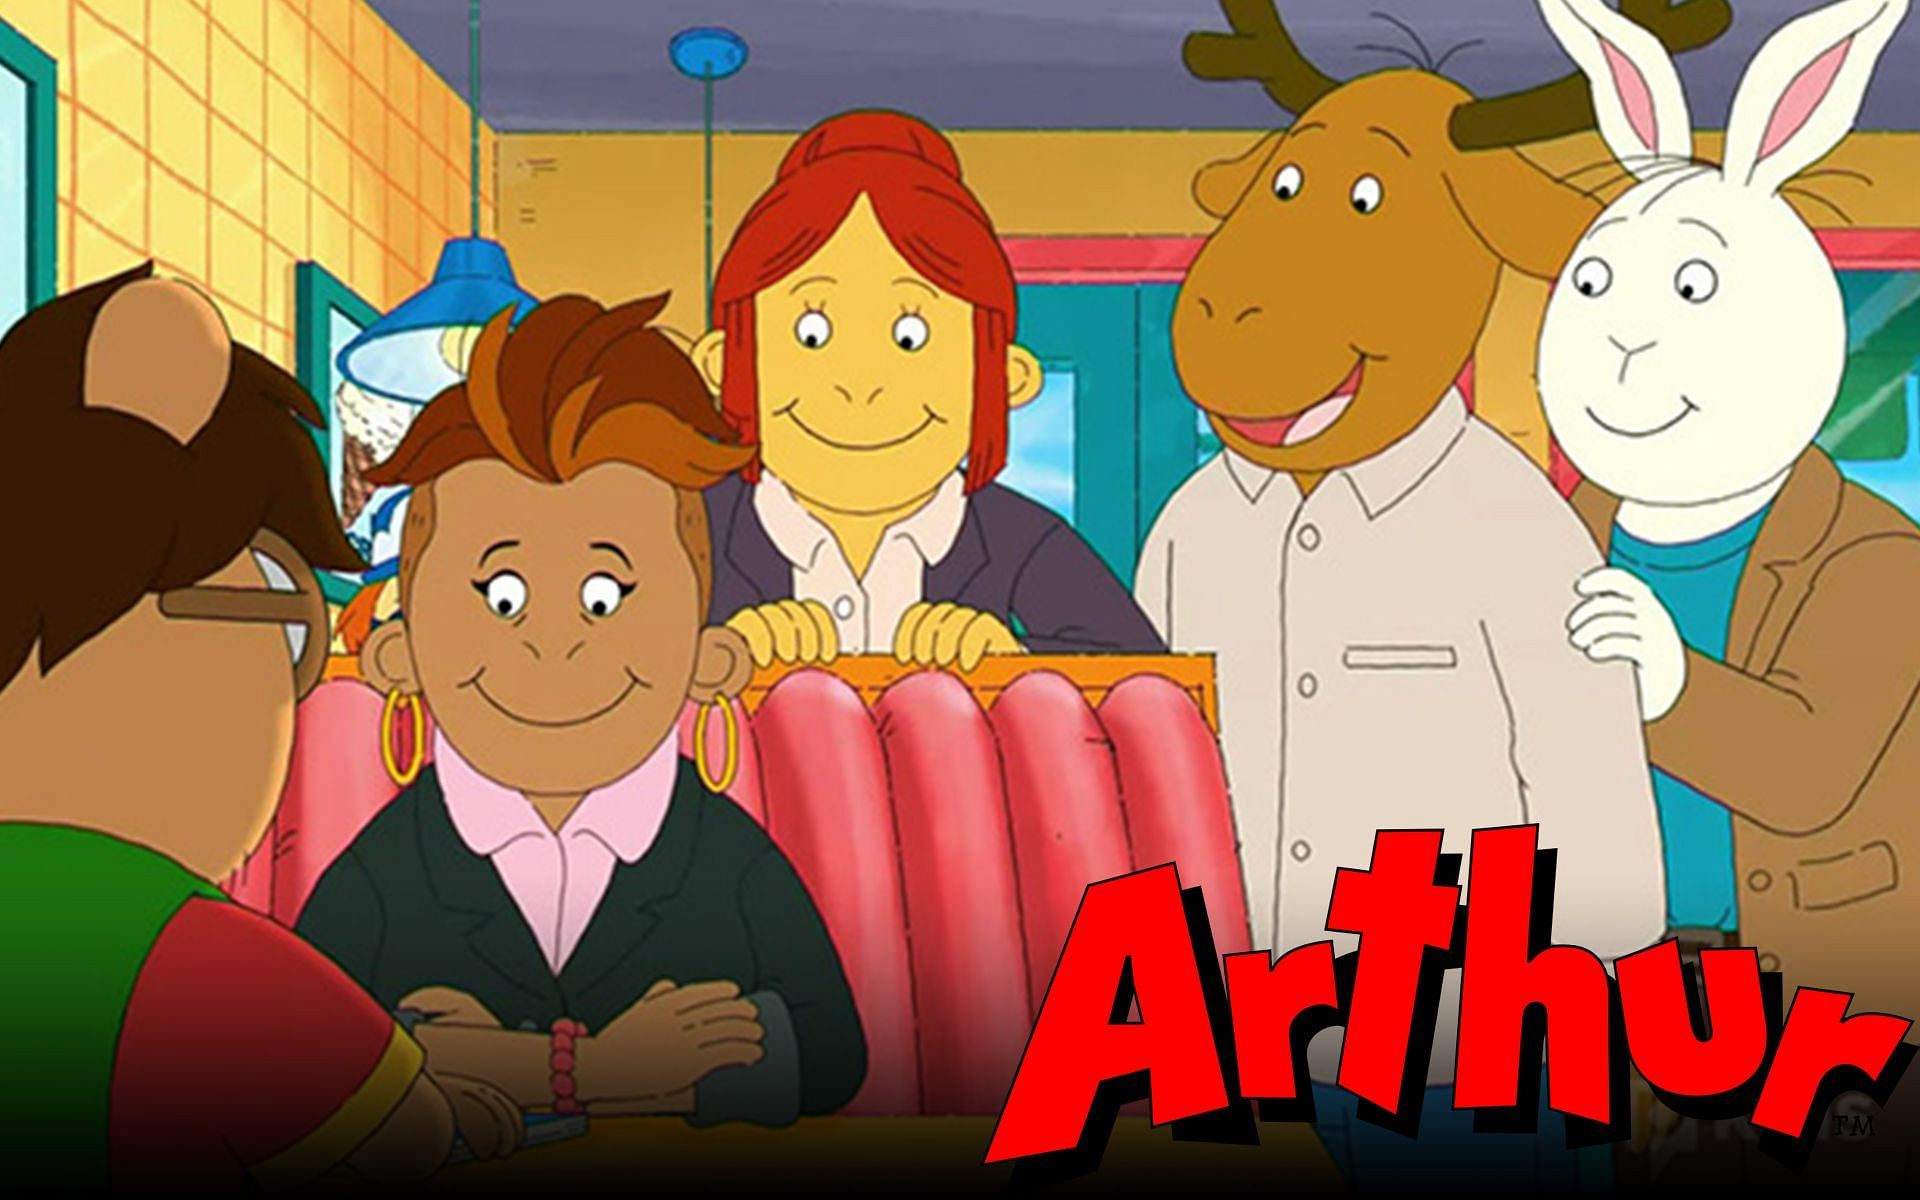 Arthur Series finale ending explained: Characters' grown-up jobs revealed